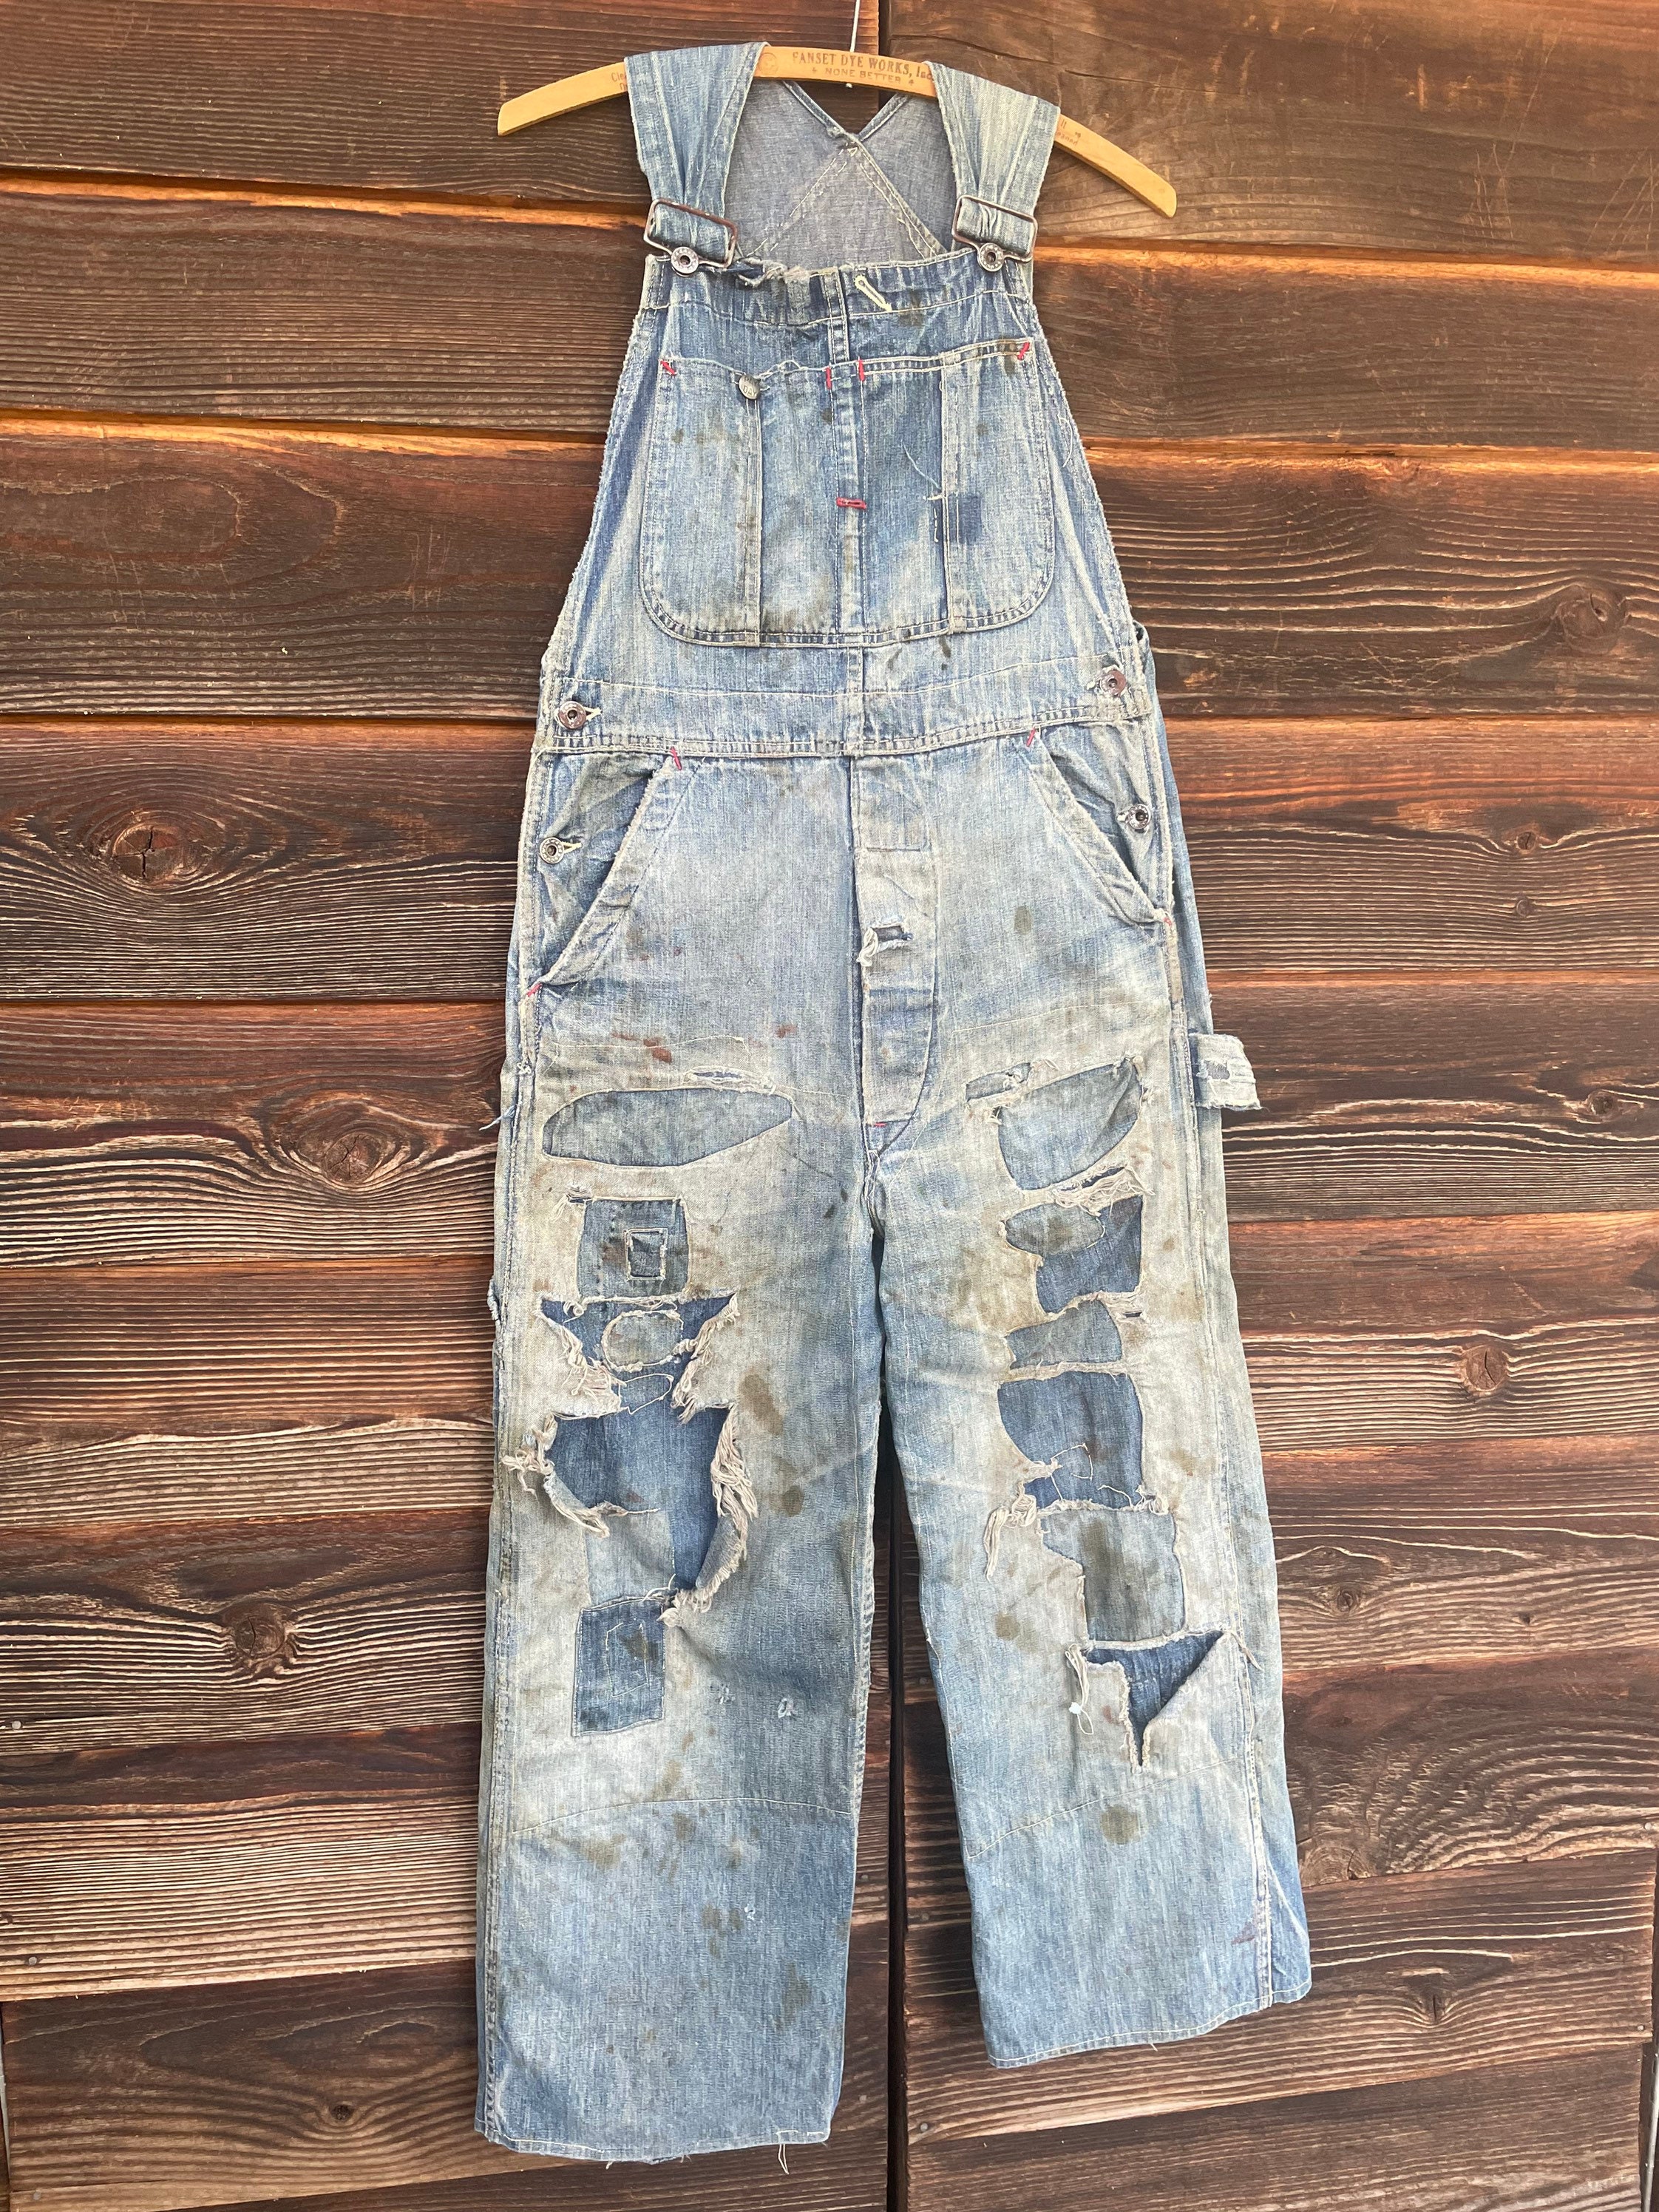 Pay Day Overalls - Etsy